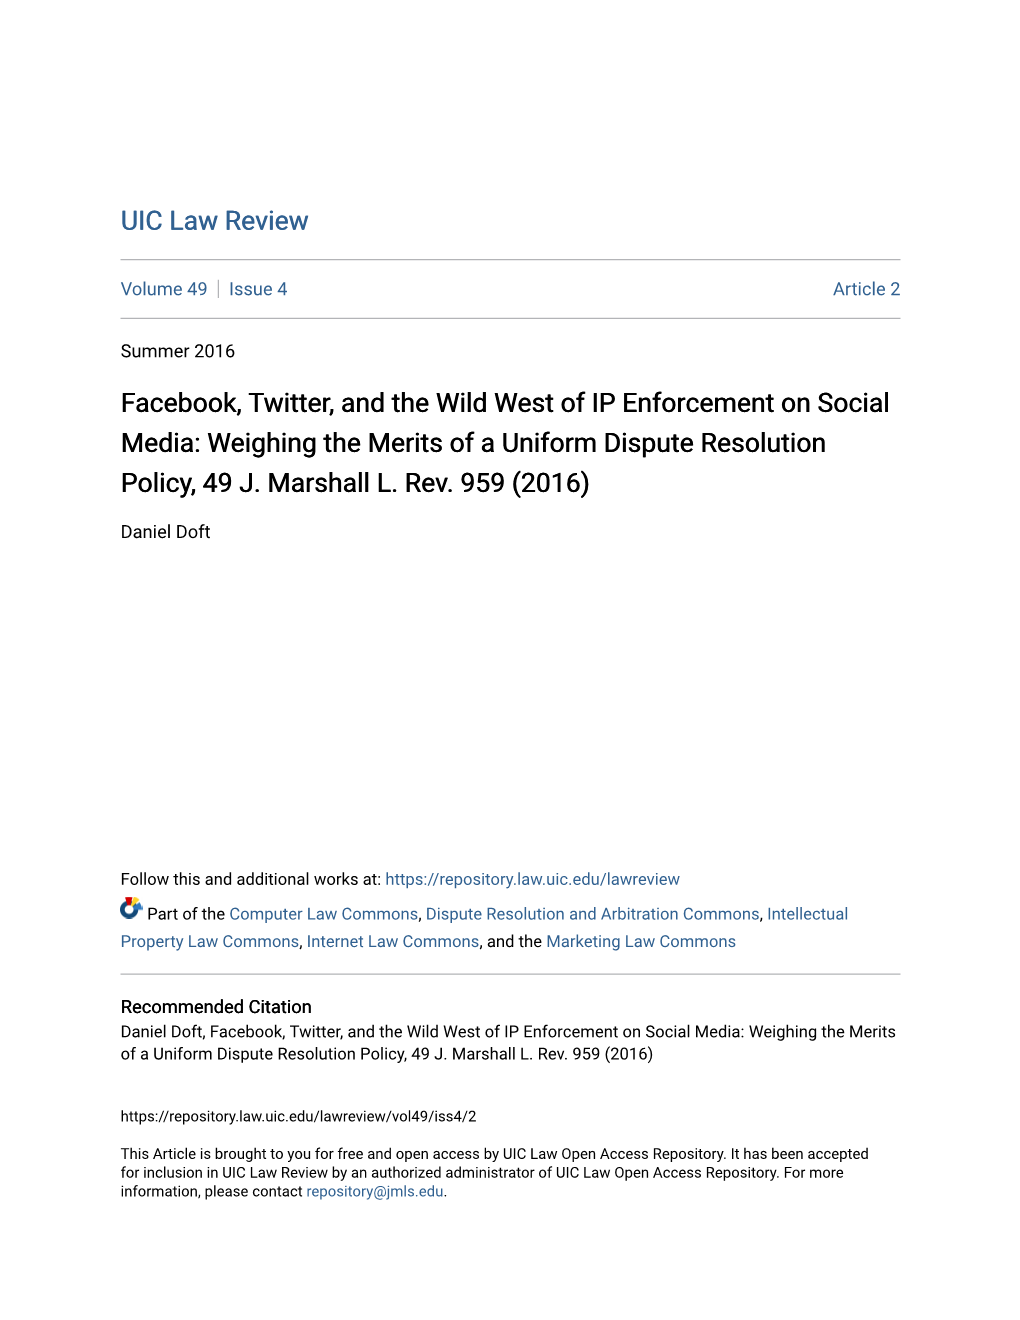 Facebook, Twitter, and the Wild West of IP Enforcement on Social Media: Weighing the Merits of a Uniform Dispute Resolution Policy, 49 J